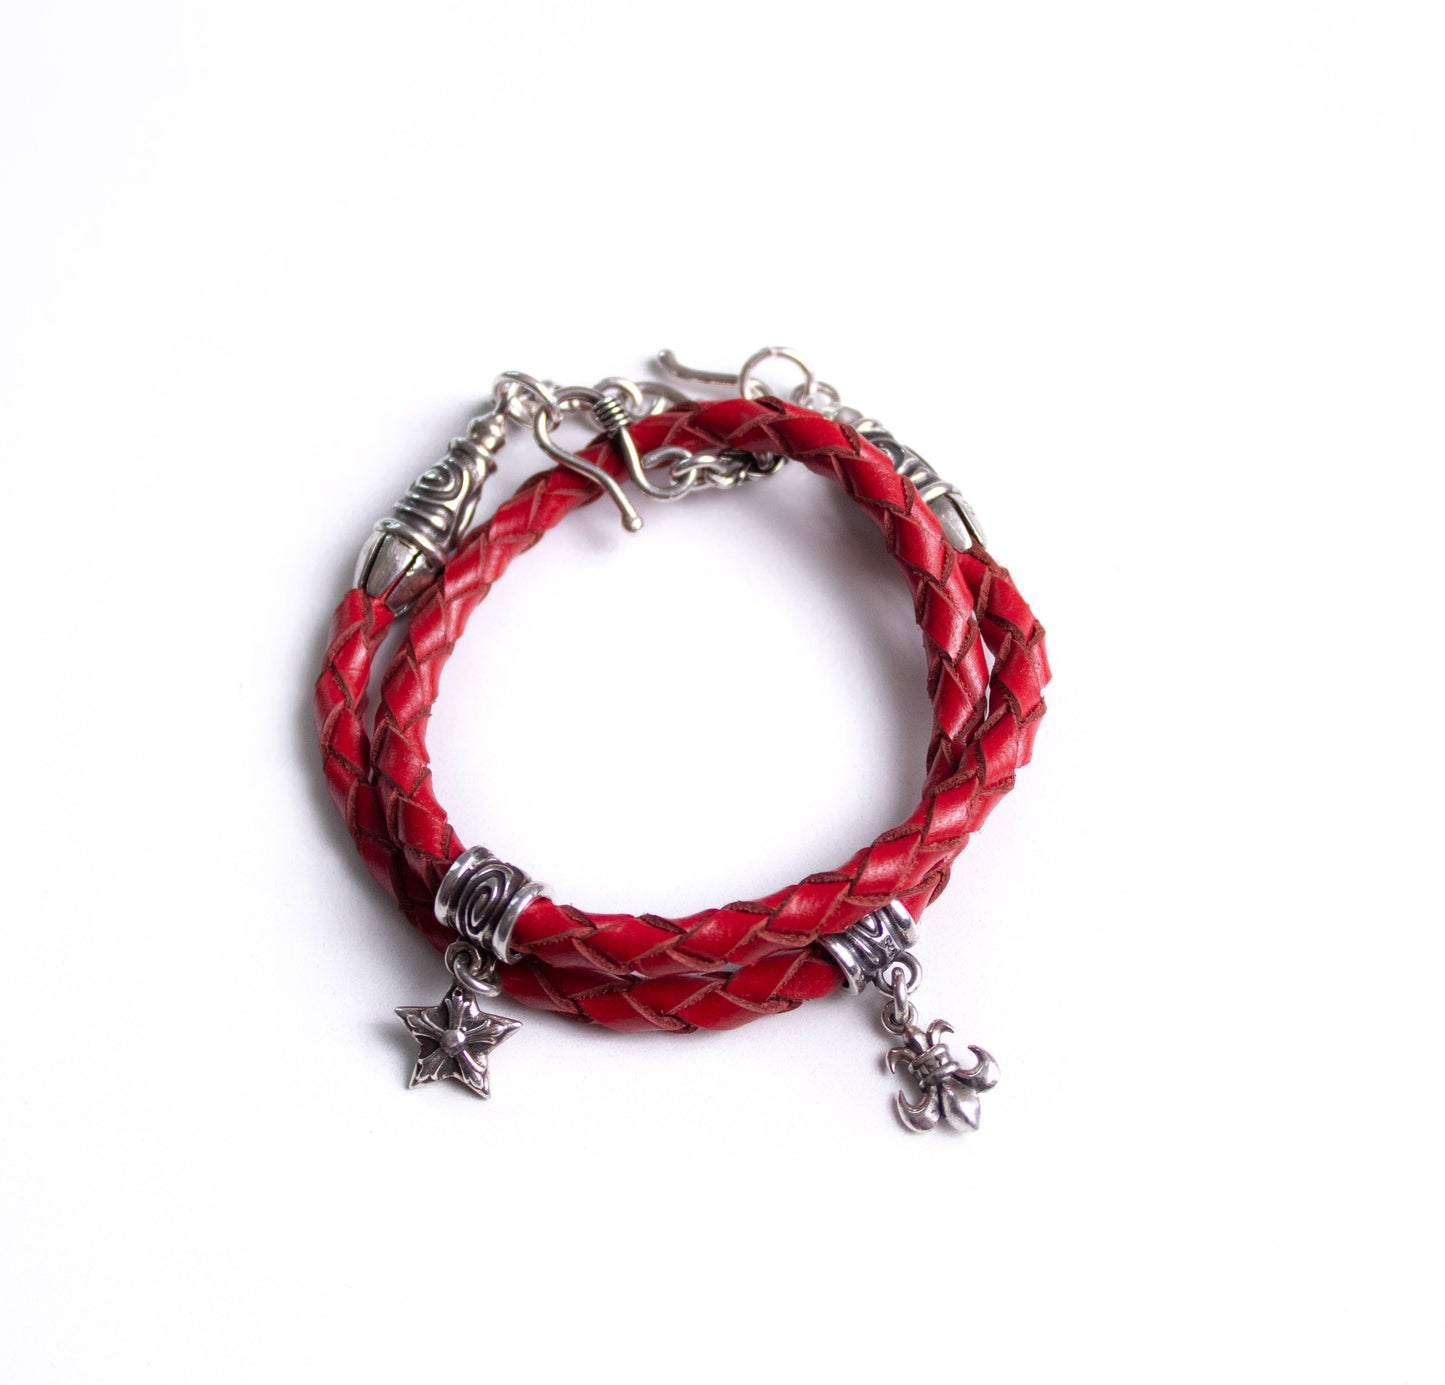 Full-Grain Genuine vegetable-tanned Leather & 925 Sterling Silver Case for iPhone. Red Genuine Leather Bracelet/Choker/Strap 4 hand-braided strands.- F02